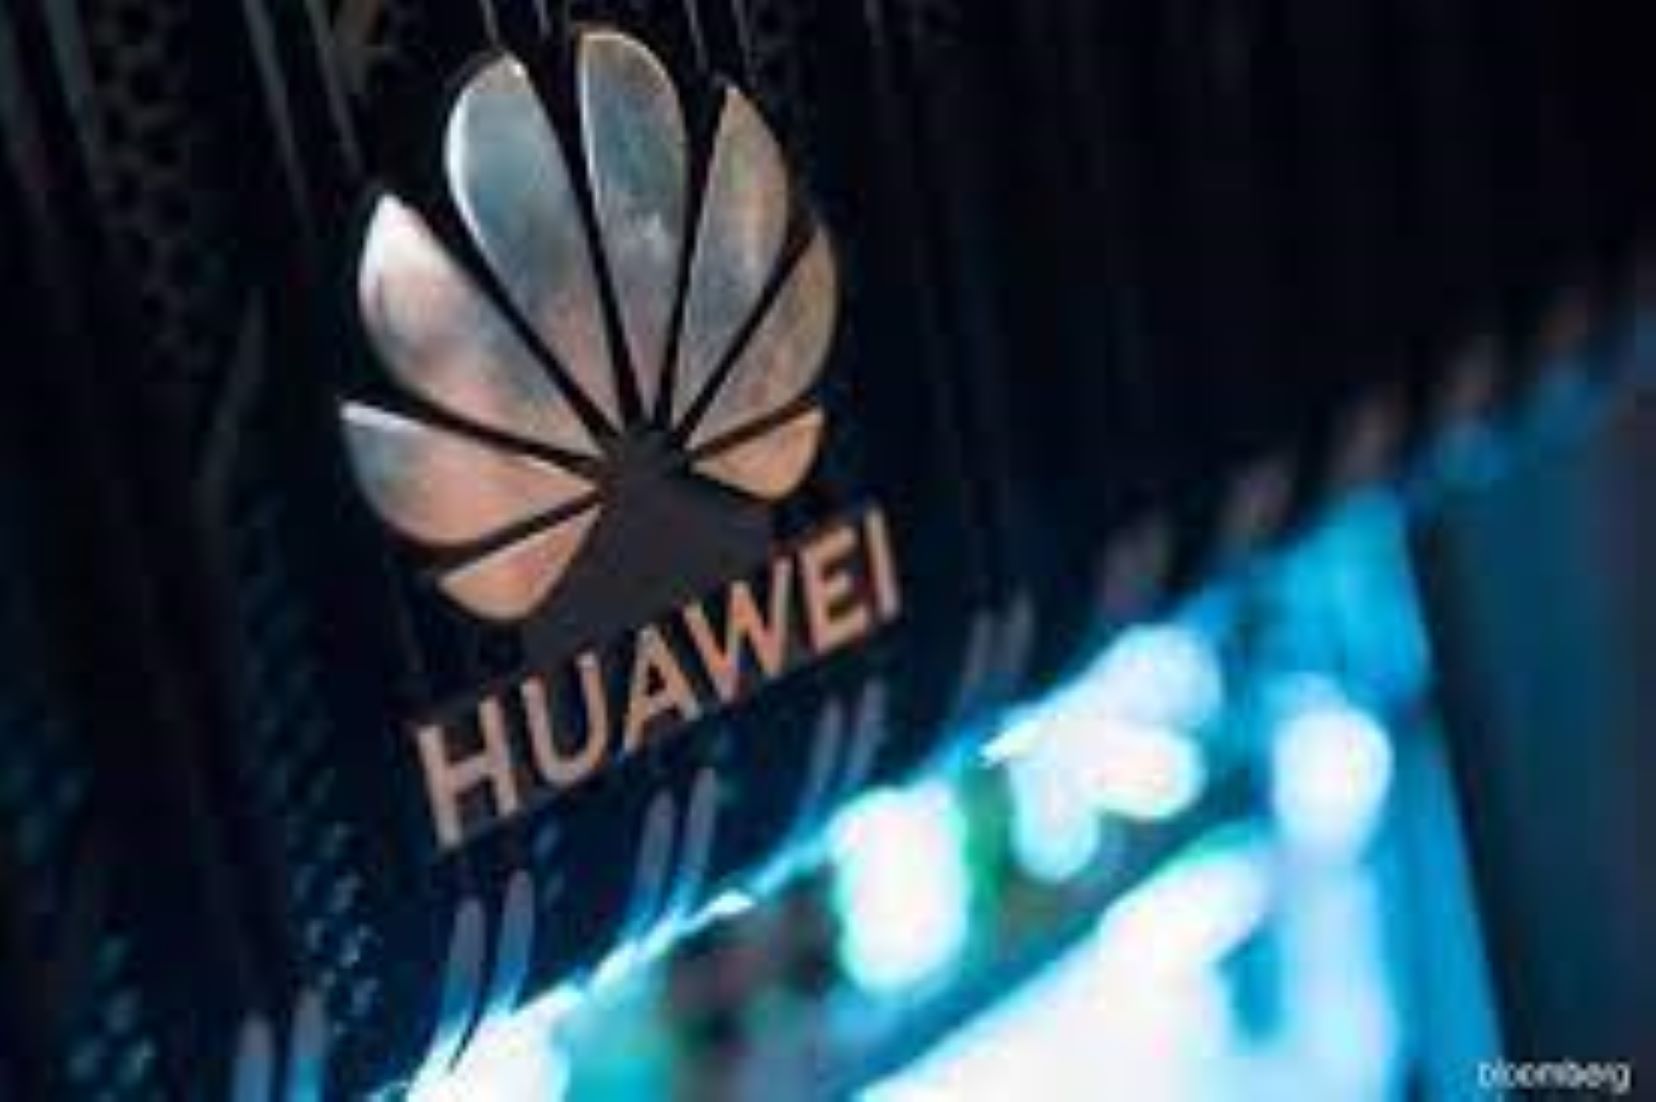 Huawei Malaysia Commits To Building Sustainable Ultra-Broadband Industry